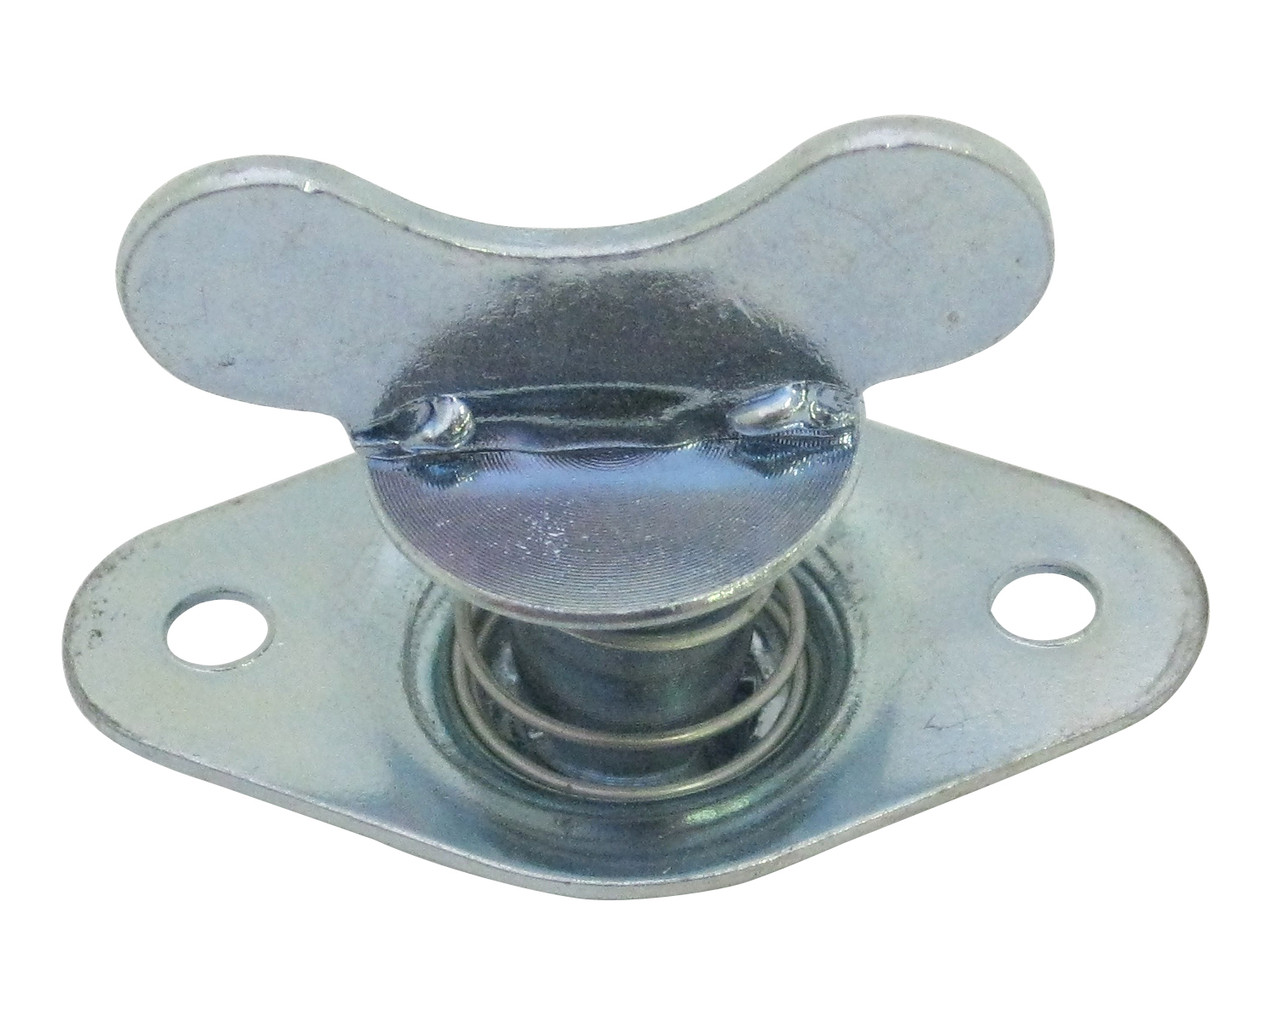 7/16" Winged Self Ejecting Button